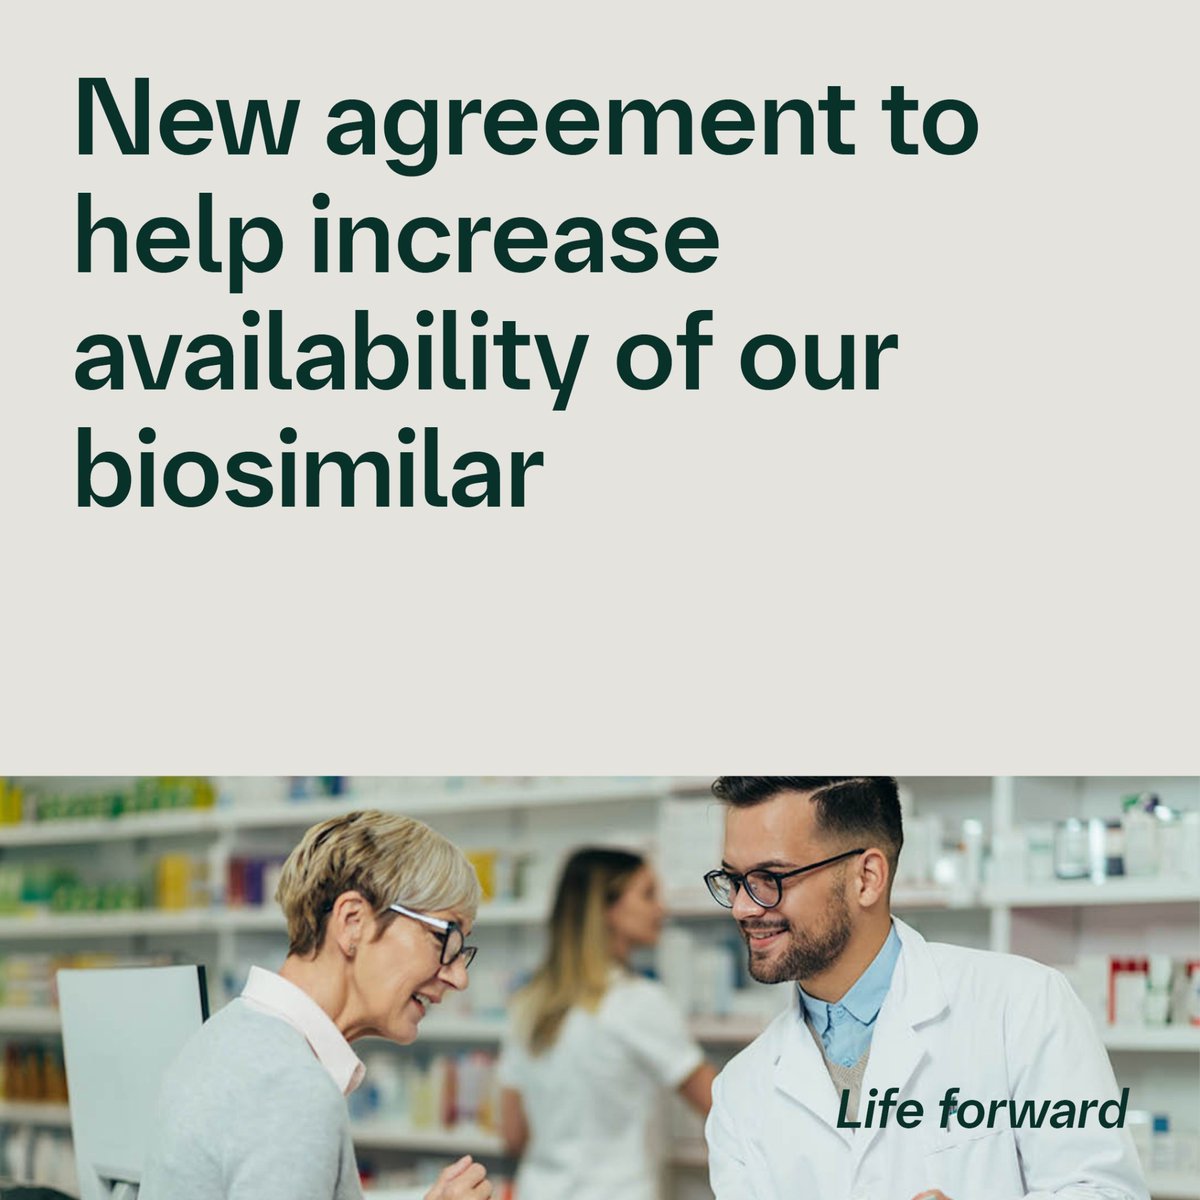 #NEWS – We’re excited to expand access to our biosimilar through a private-label agreement. Learn more: bit.ly/3UUBNOf